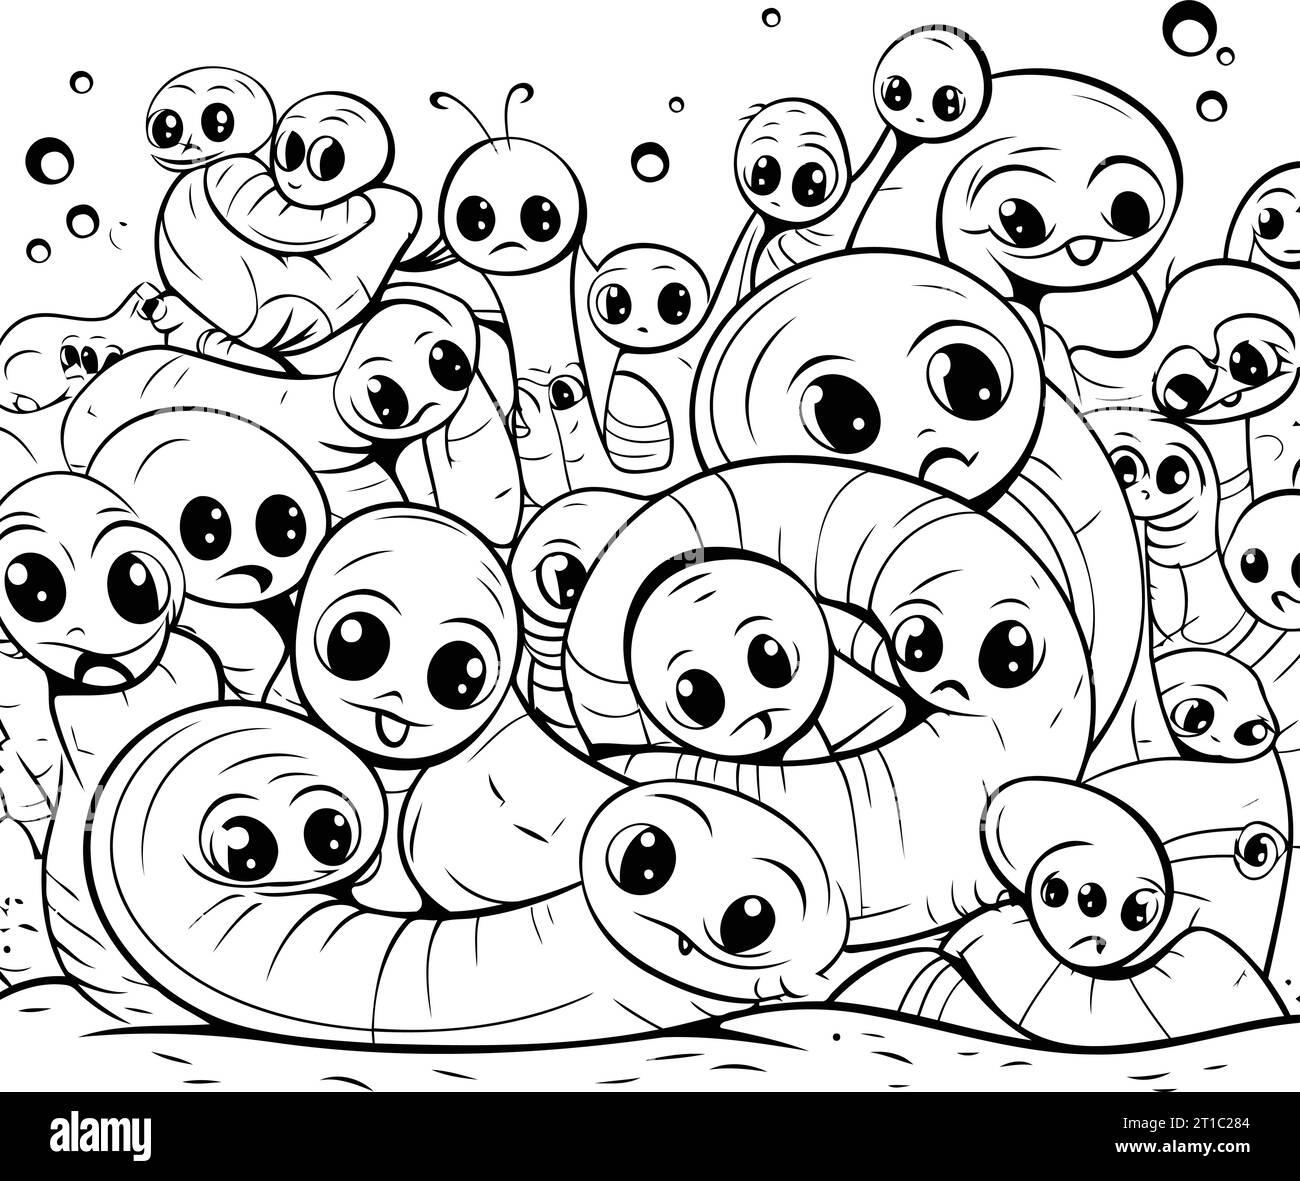 Black and white illustration of a group of funny cartoon caterpillars. Stock Vector